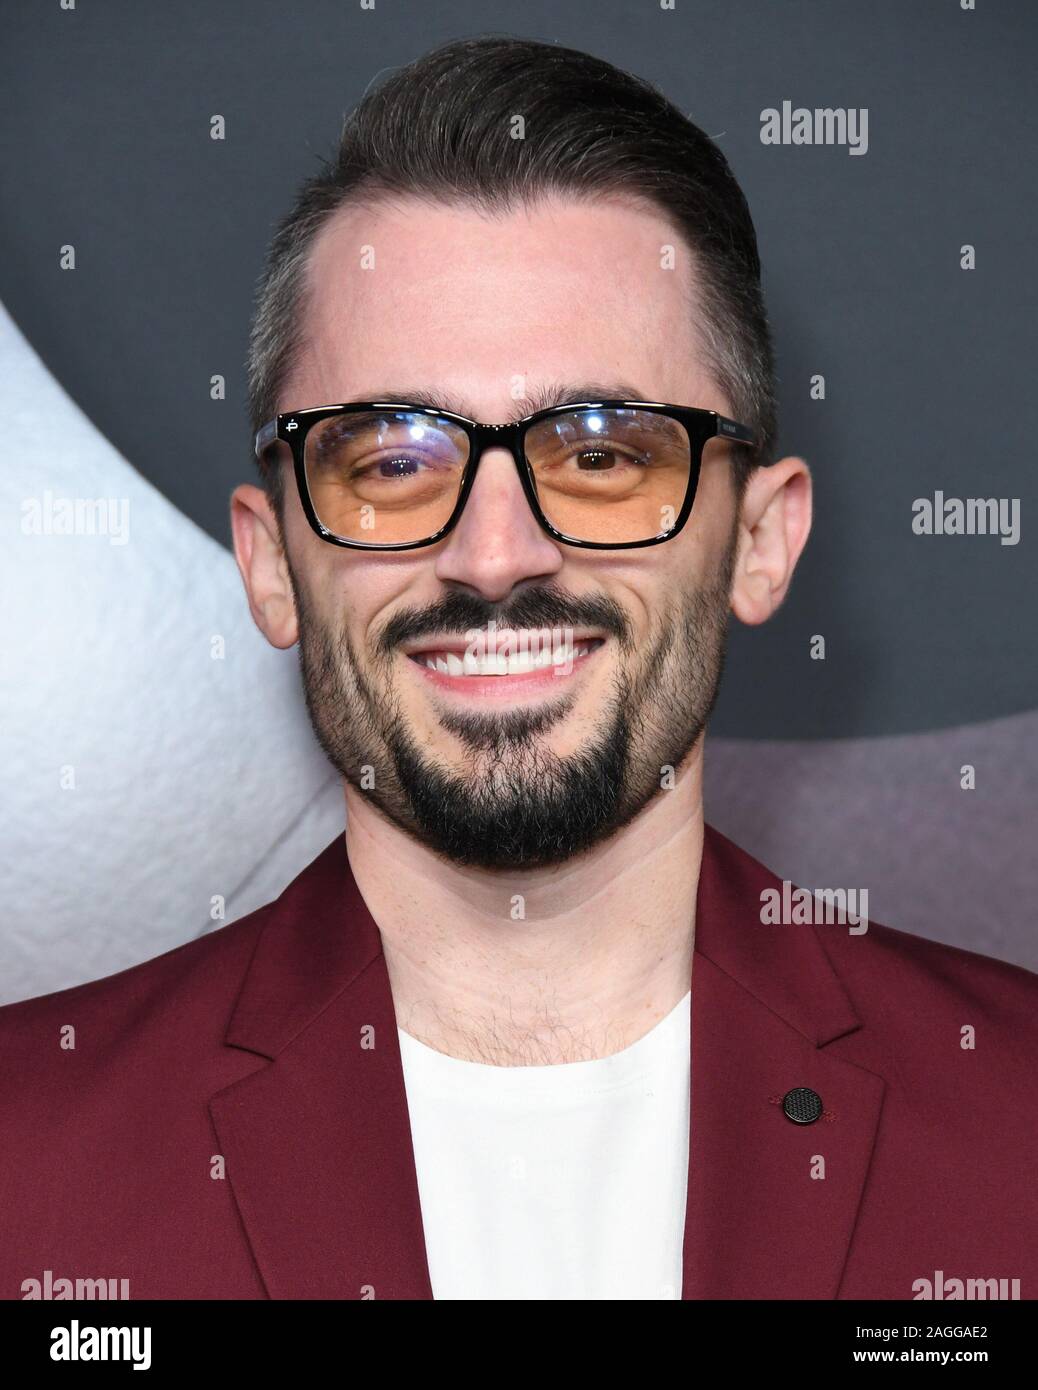 Los Angeles, USA . 18 December 2019 - Hollywood, California - Brad Lambert. Universal Pictures' '1917' Los Angeles Premiere held at TCL Chinese Theatre. Photo Credit: Birdie Thompson/AdMedia /MediaPunch Credit: MediaPunch Inc/Alamy Live News Stock Photo